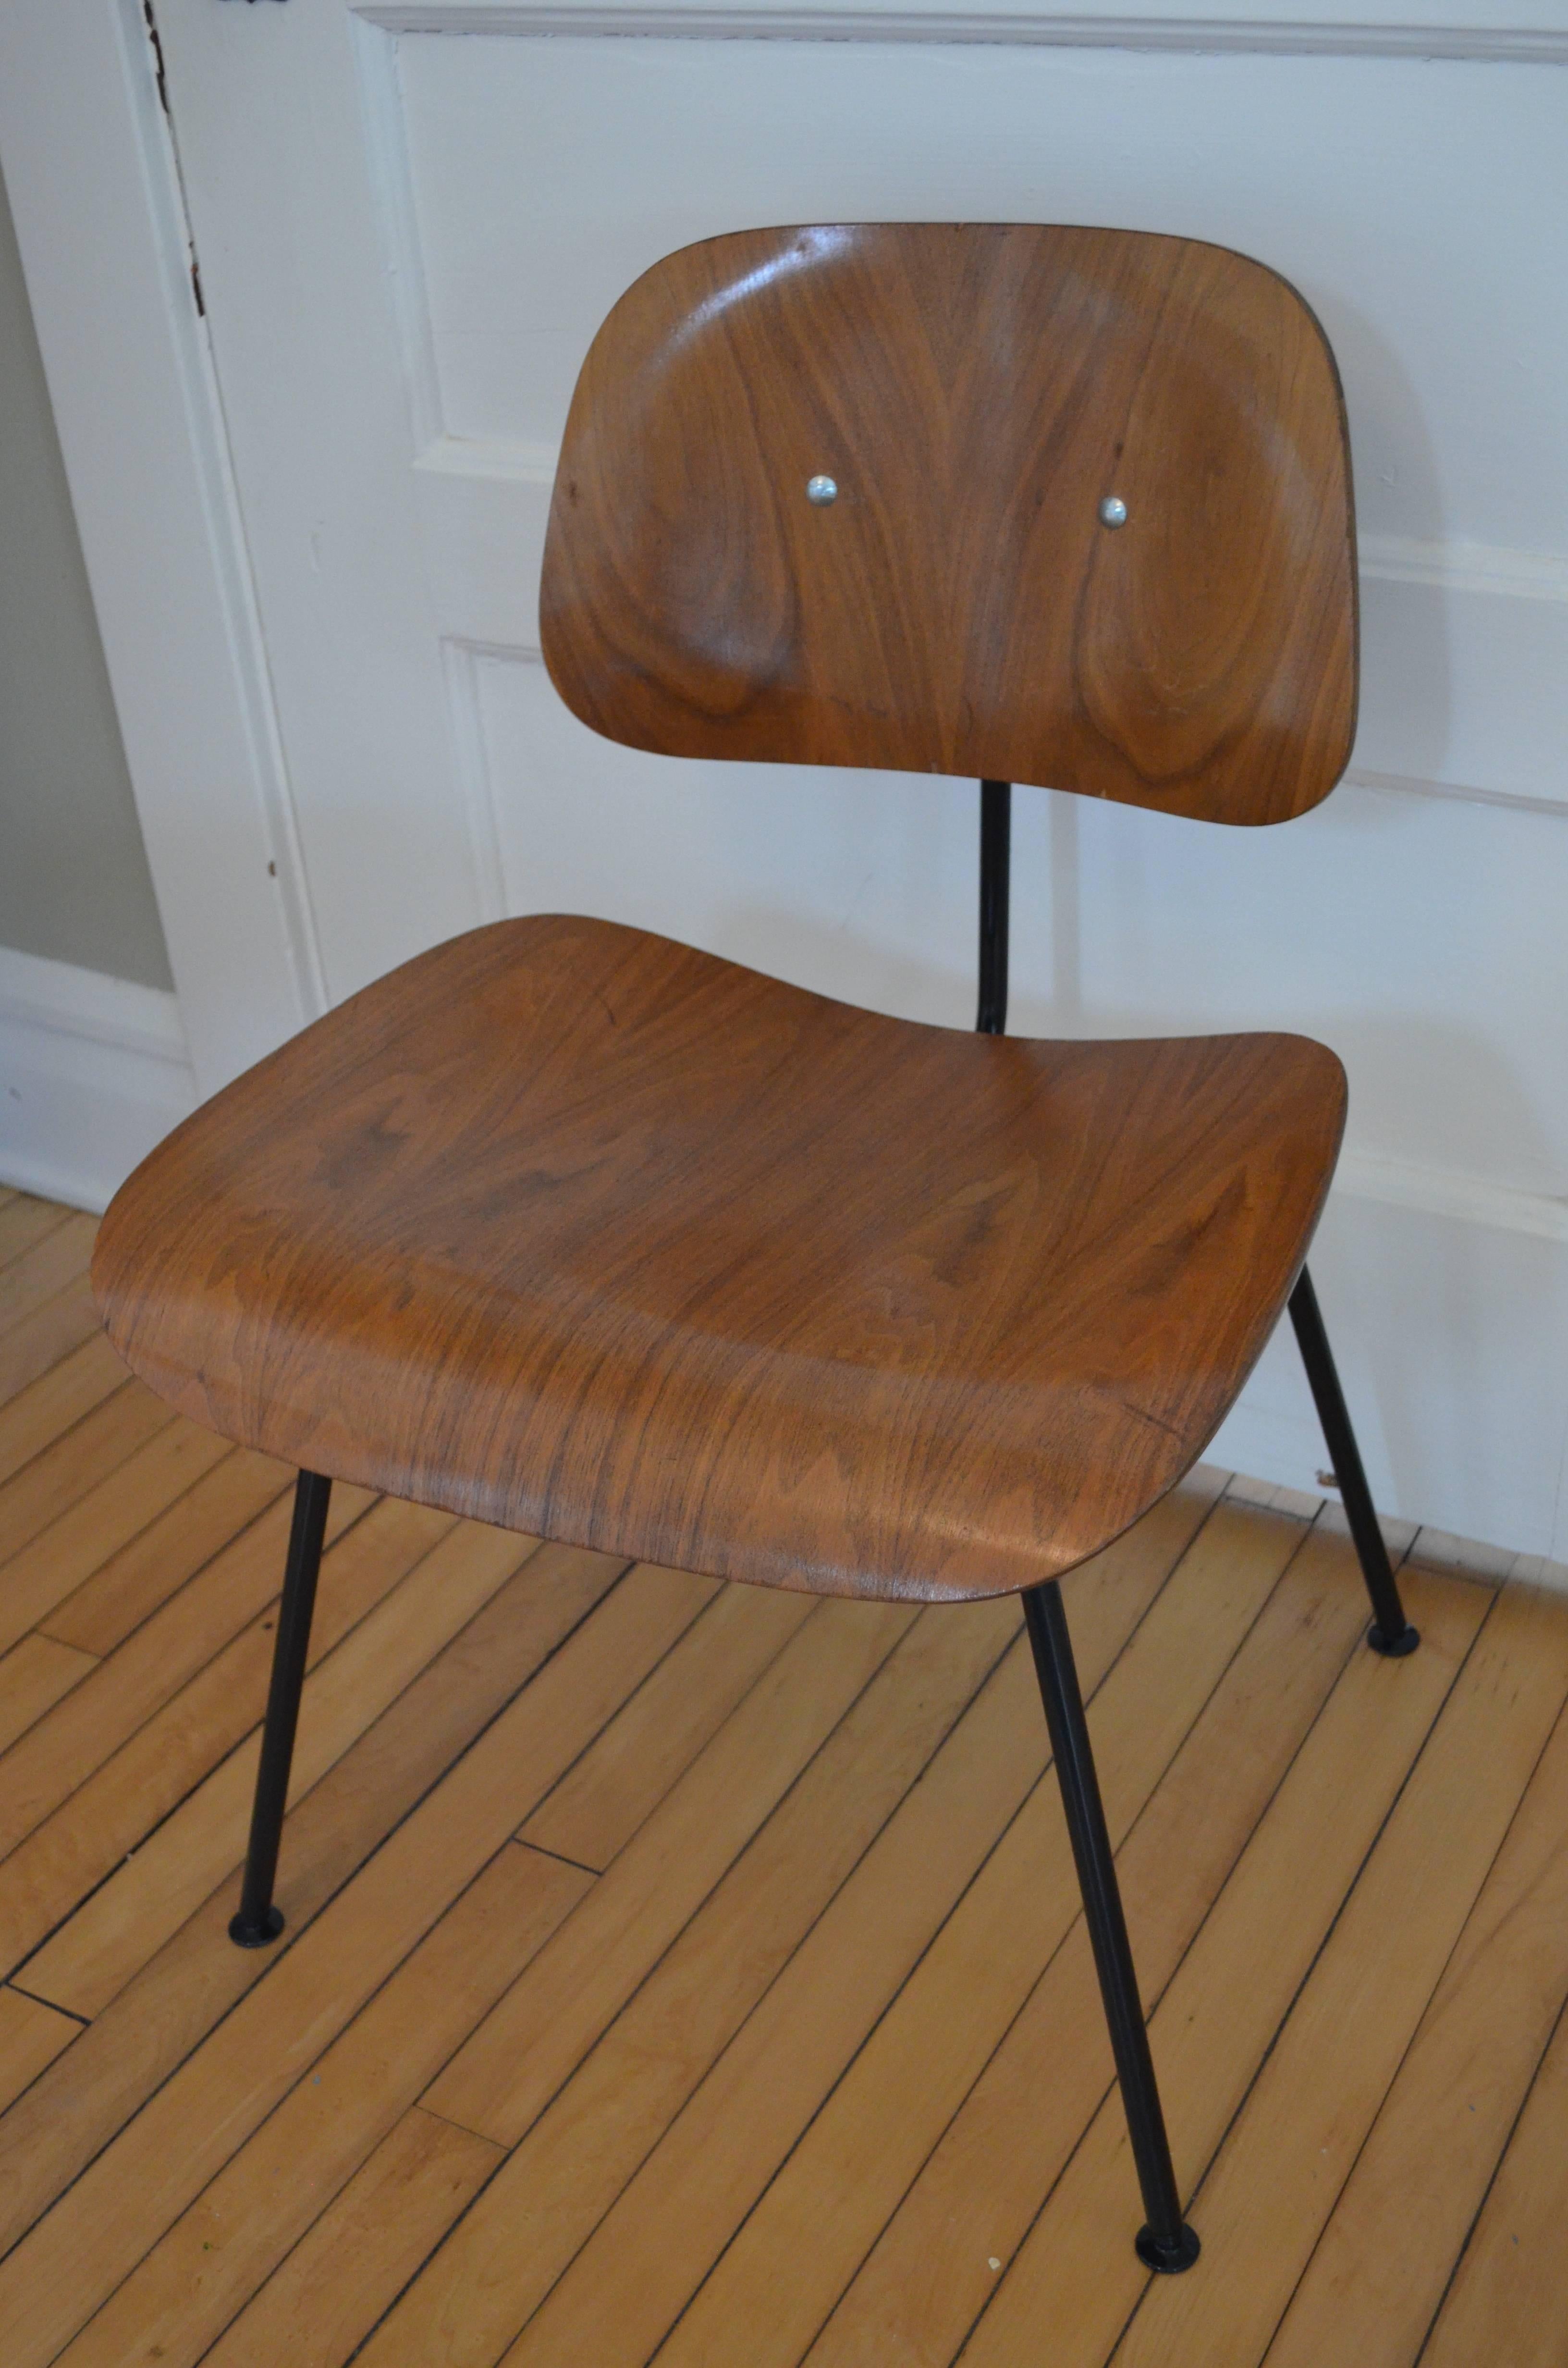 Mid-Century Modern Herman Miller walnut dining room chair, circa 1950s with new black steel frame from Herman Miller. The original icon 